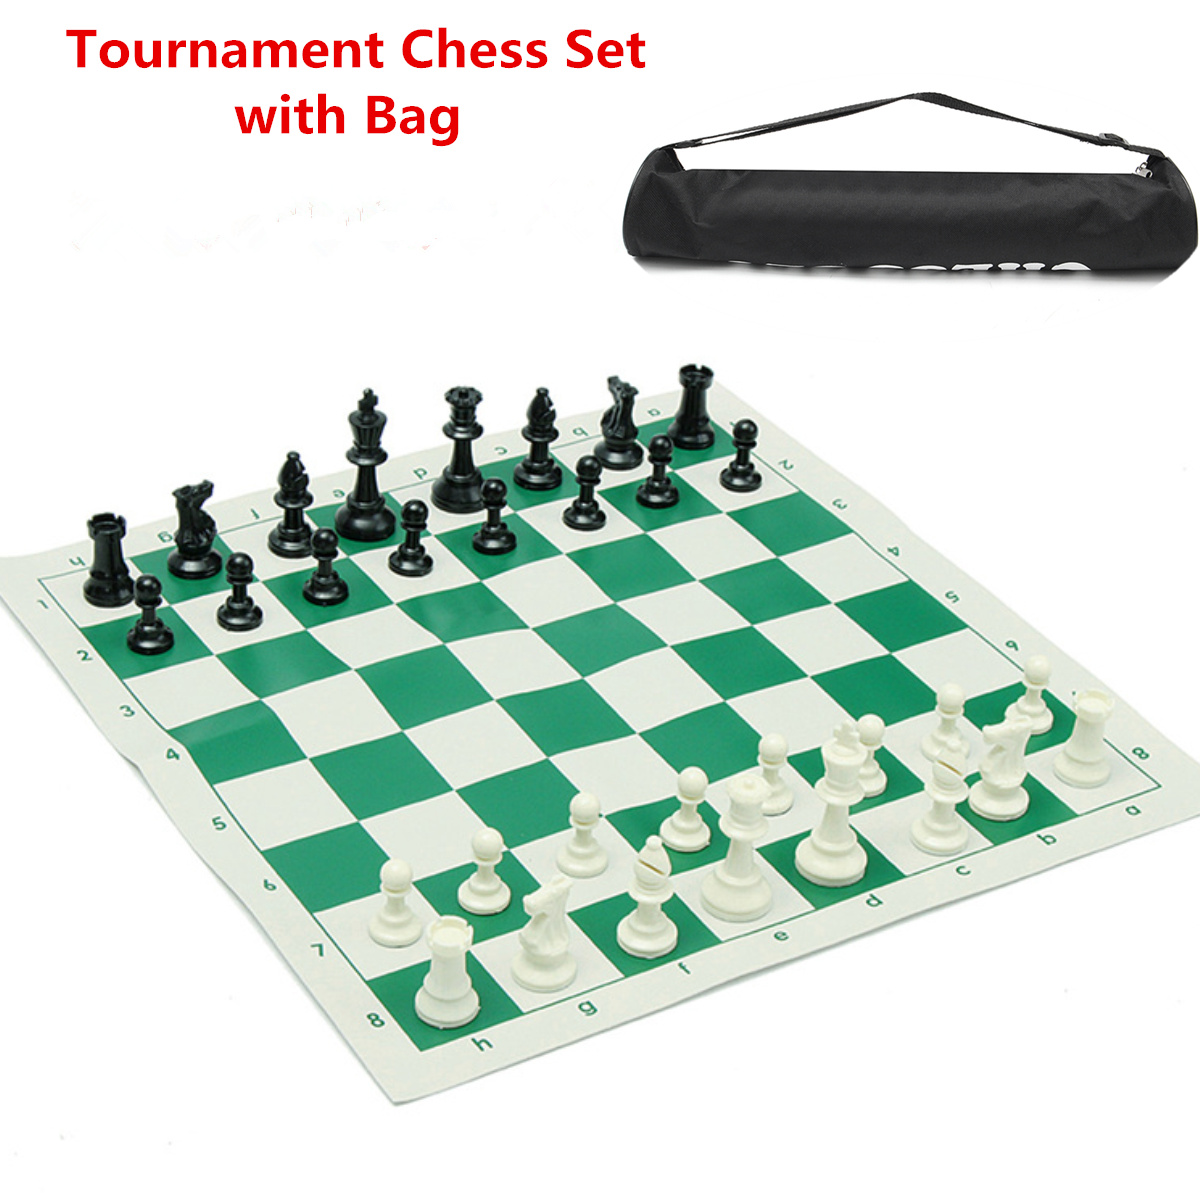 Plastic-Gambit-Tournament-Chess-Set-Roll-up-Mat-And-Bag-Camping-Travel-Gifts-Portable-Travelling-New-1641520-4